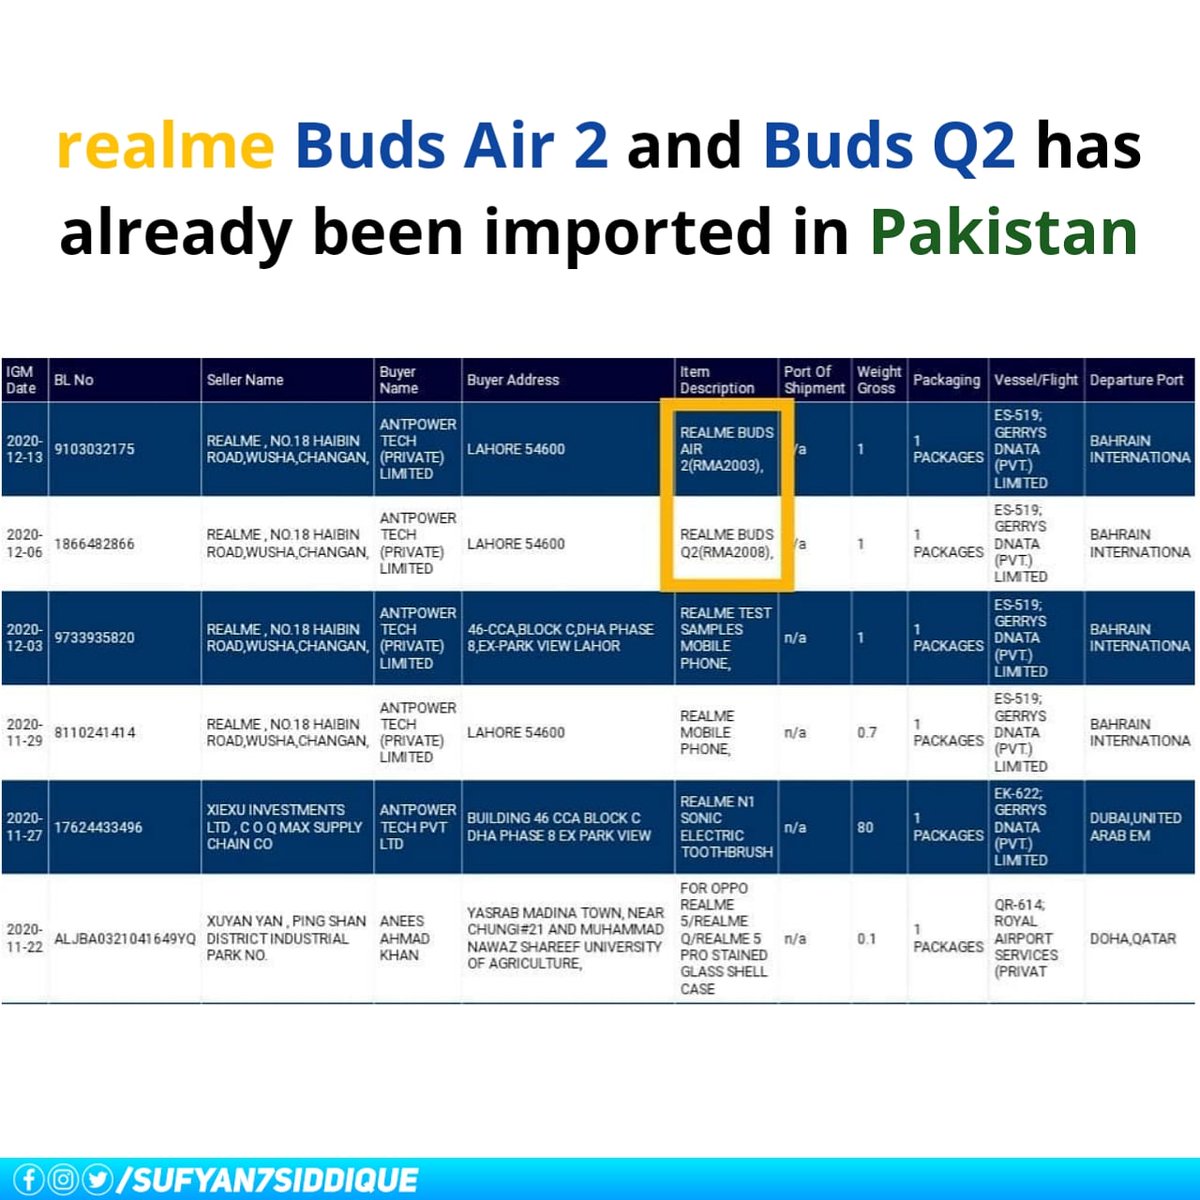 realme Buds Air 2 and Buds Q2 has already been imported in Pakistan

#realme #realmeBuds #realmeBudsAir #realmeBudsAir2 #realmeBudsQ2 #TWS #realmeTWS